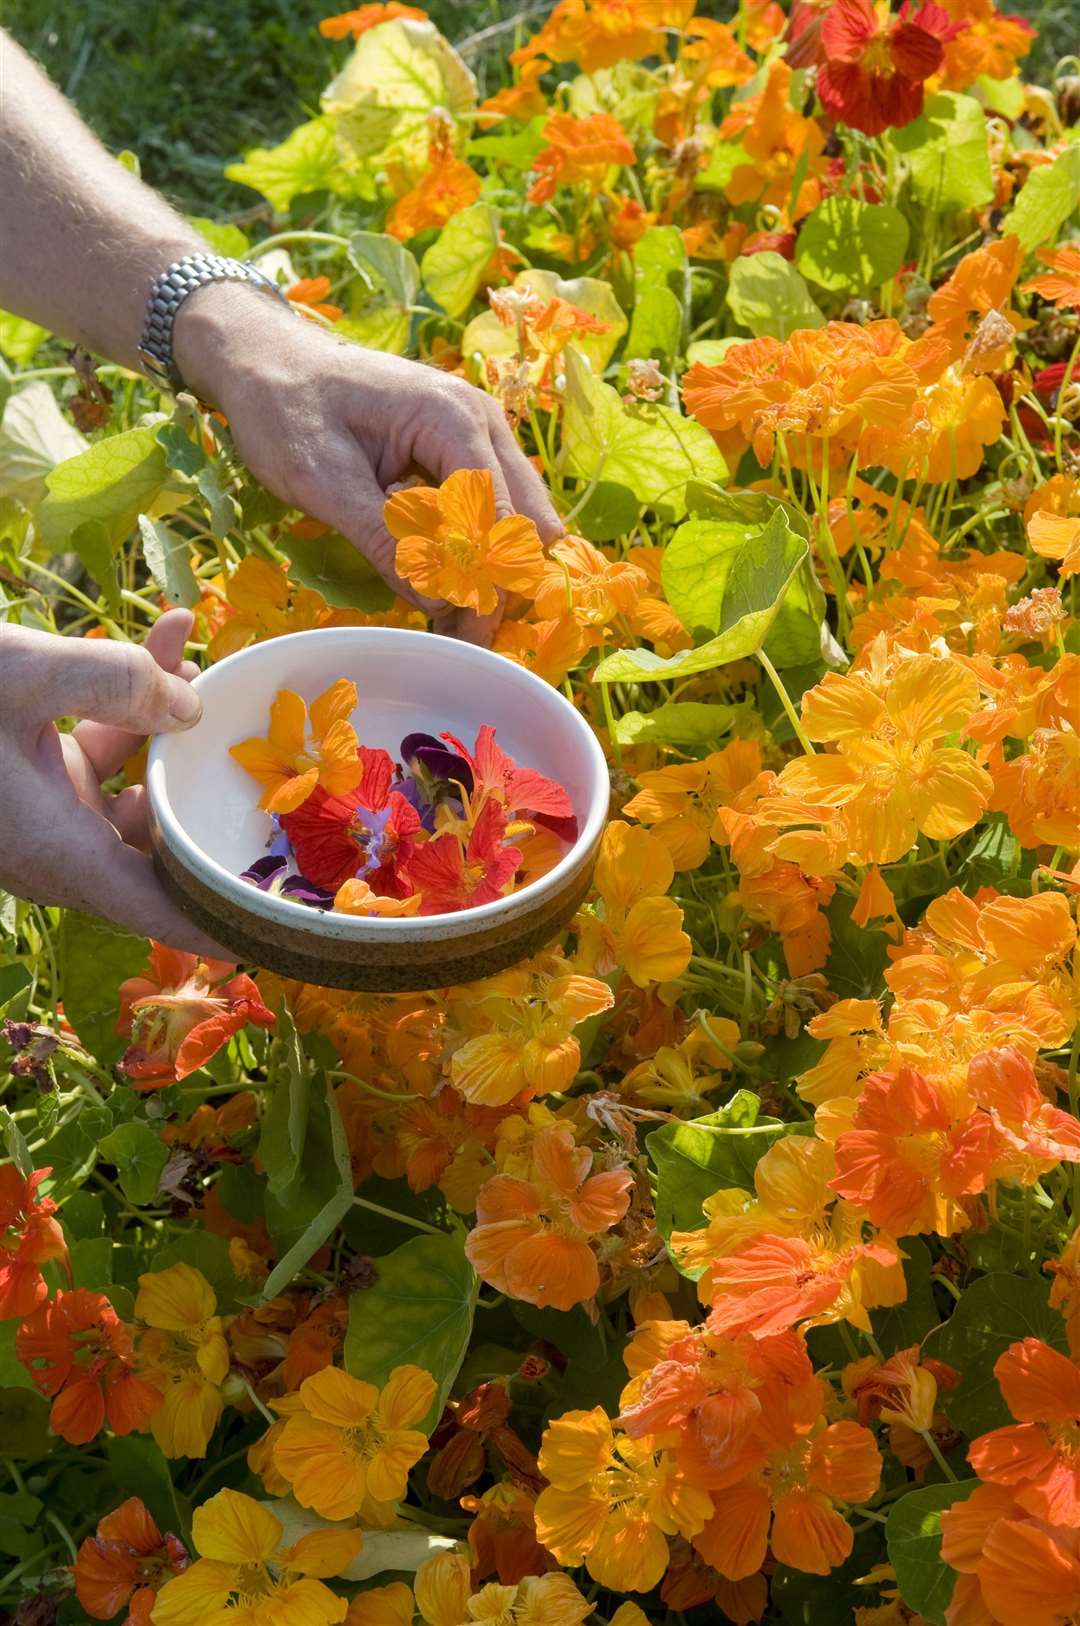 Use the flowers of nasturtiums in salads. Picture: Peter Anderson/DK Images/PA